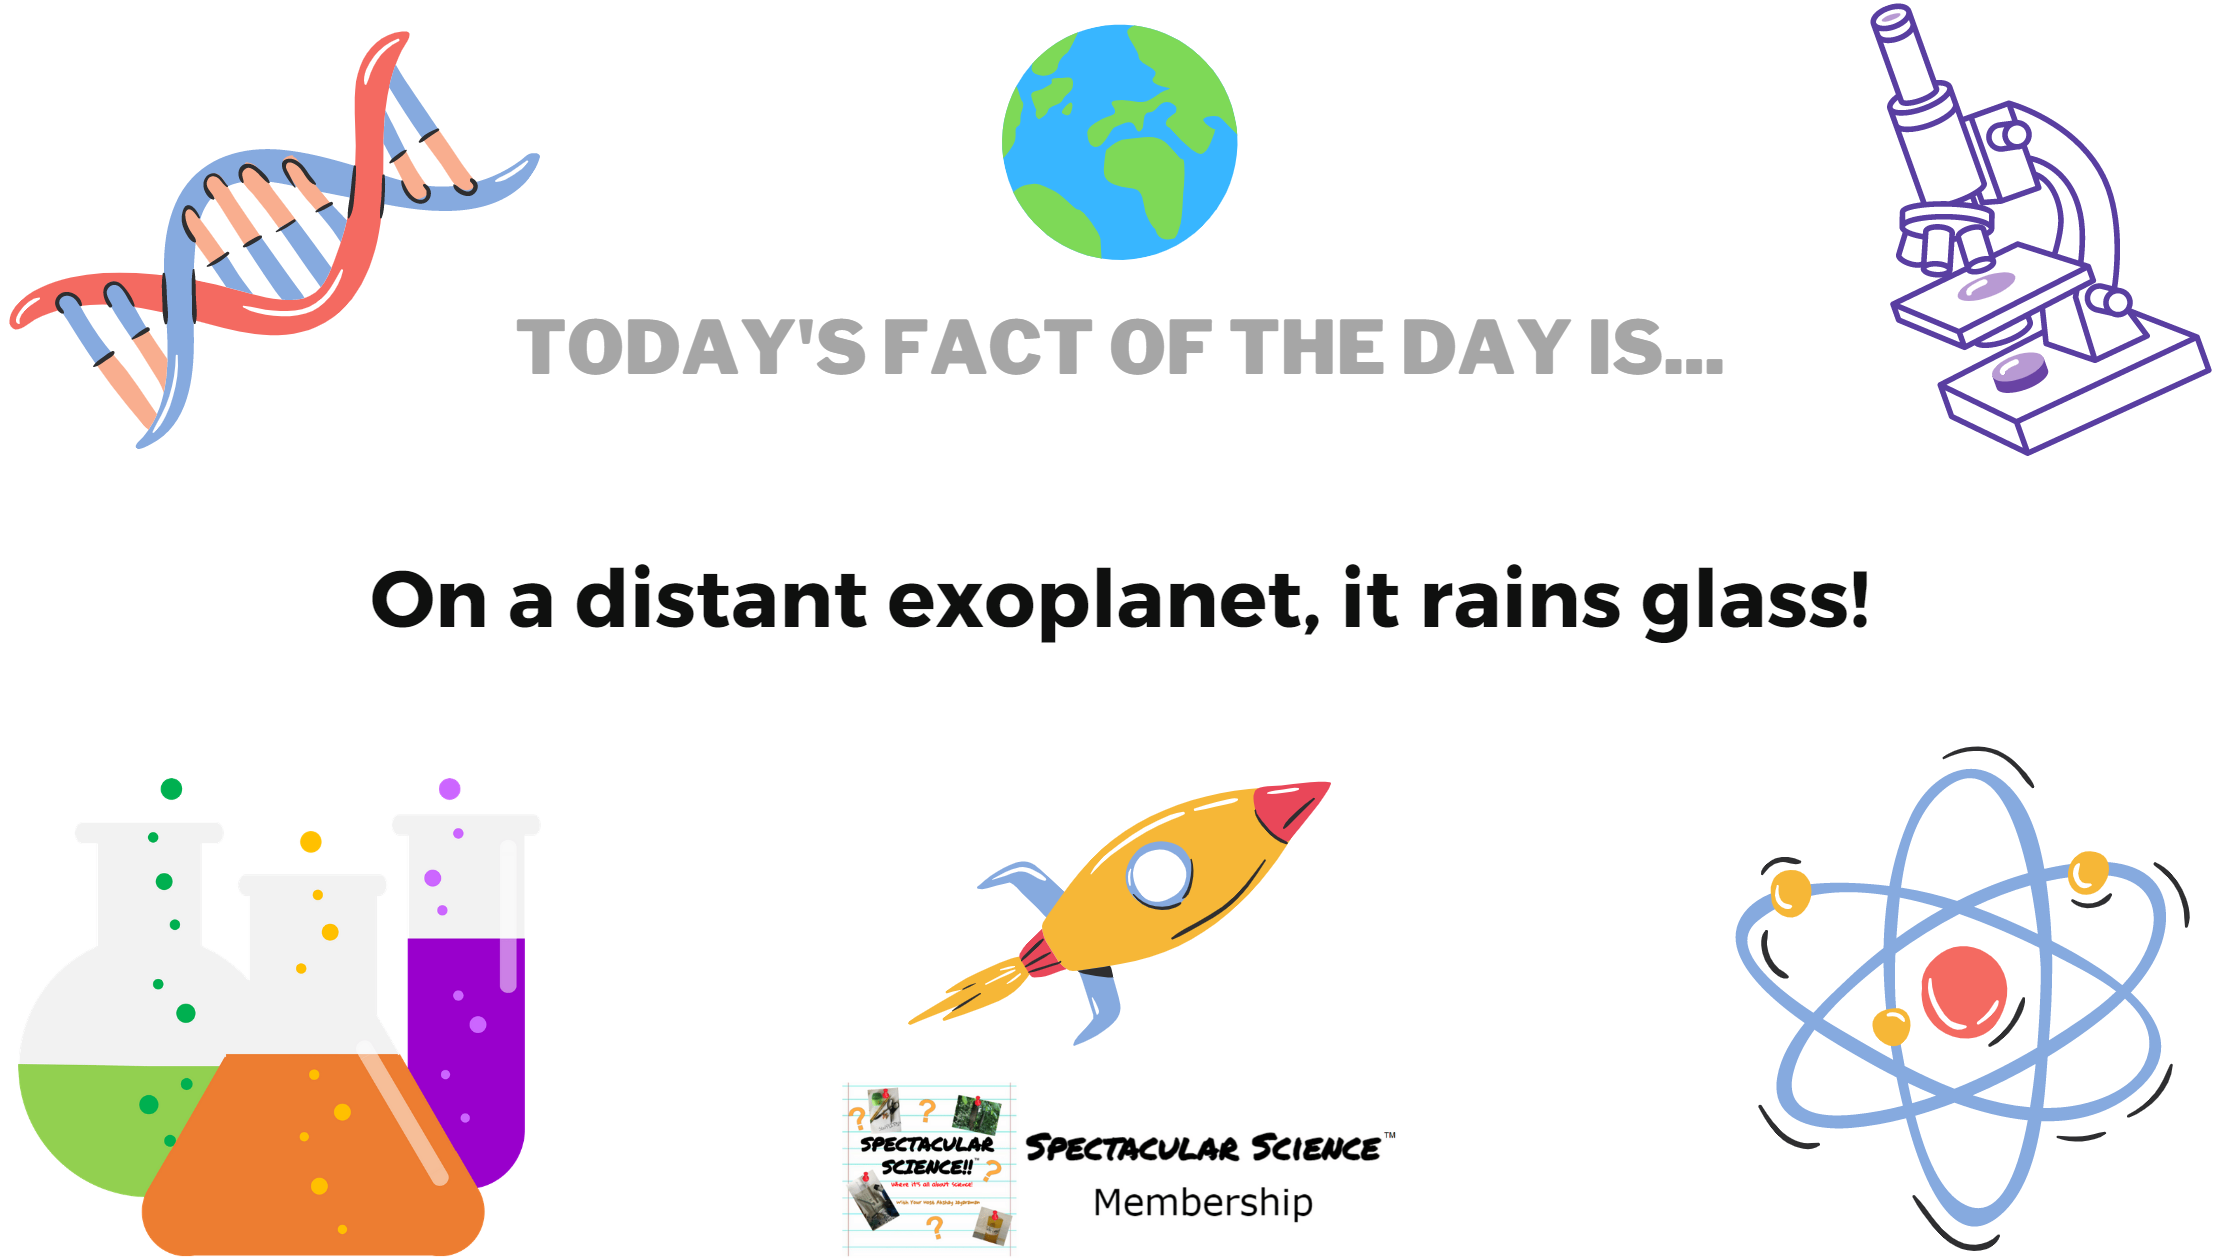 Fact of the Day Image February 9th